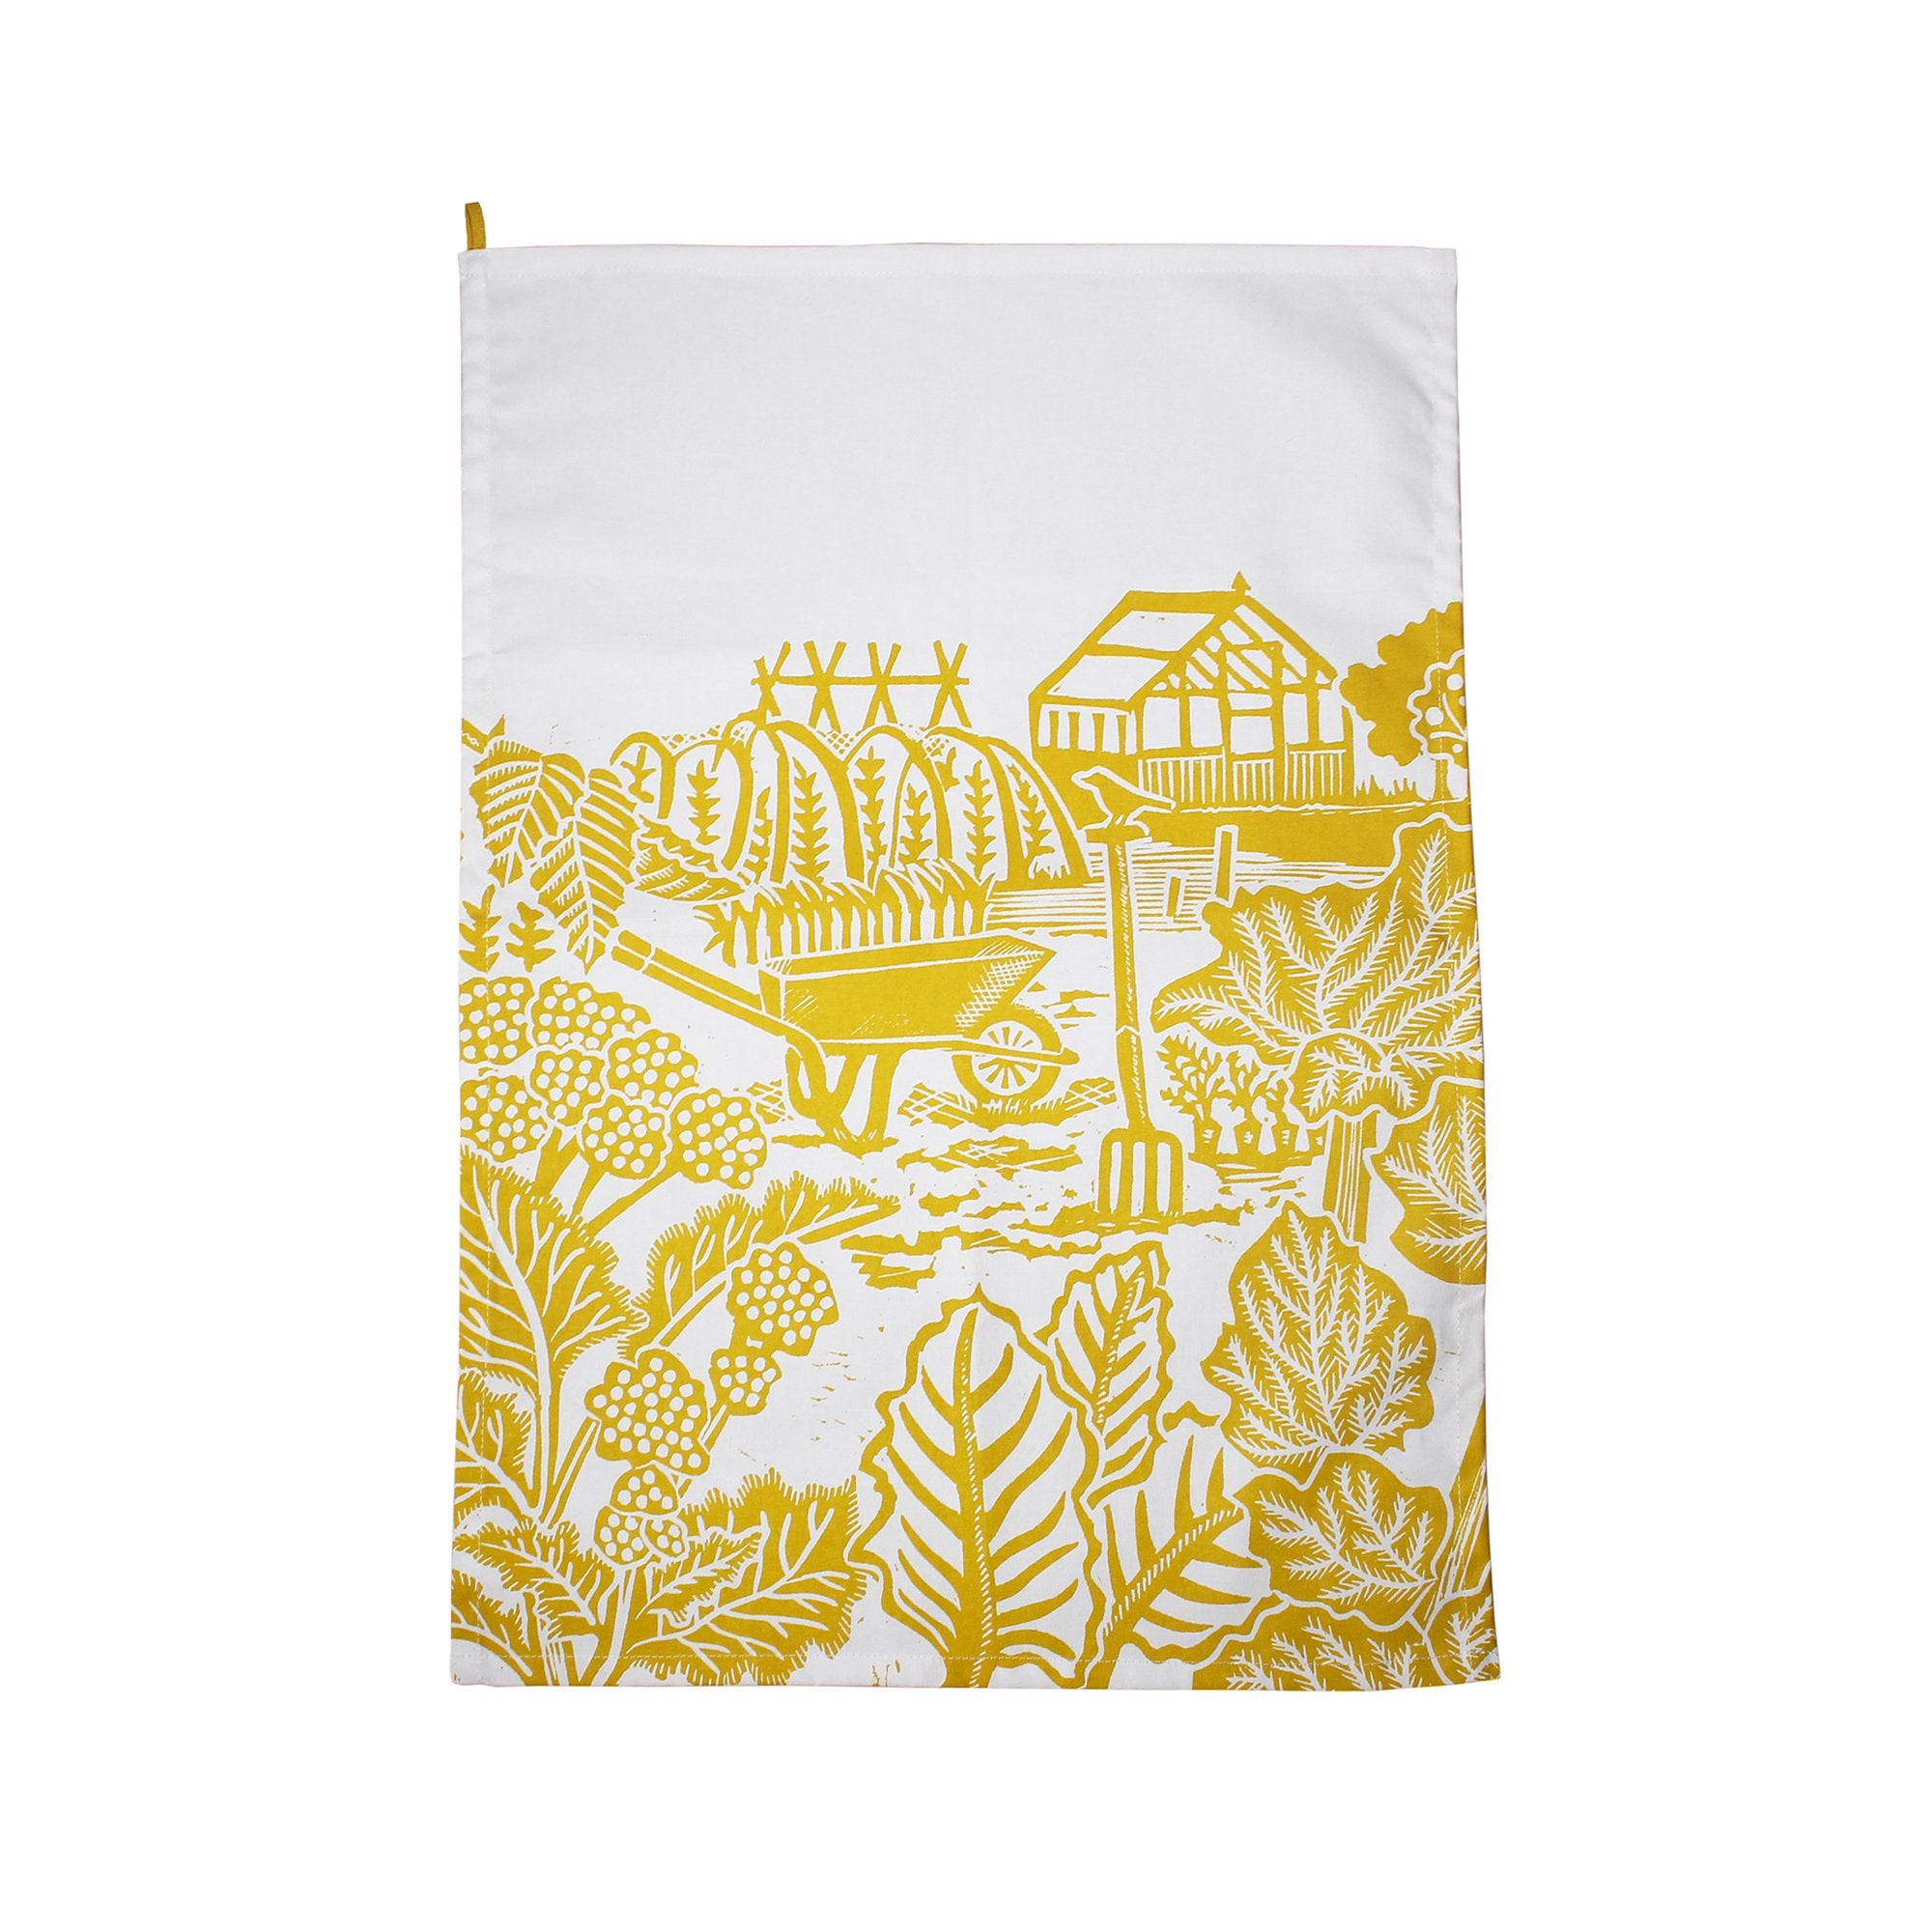 Tea Towel (Recycled Cotton) - Kate Heiss (Mustard)